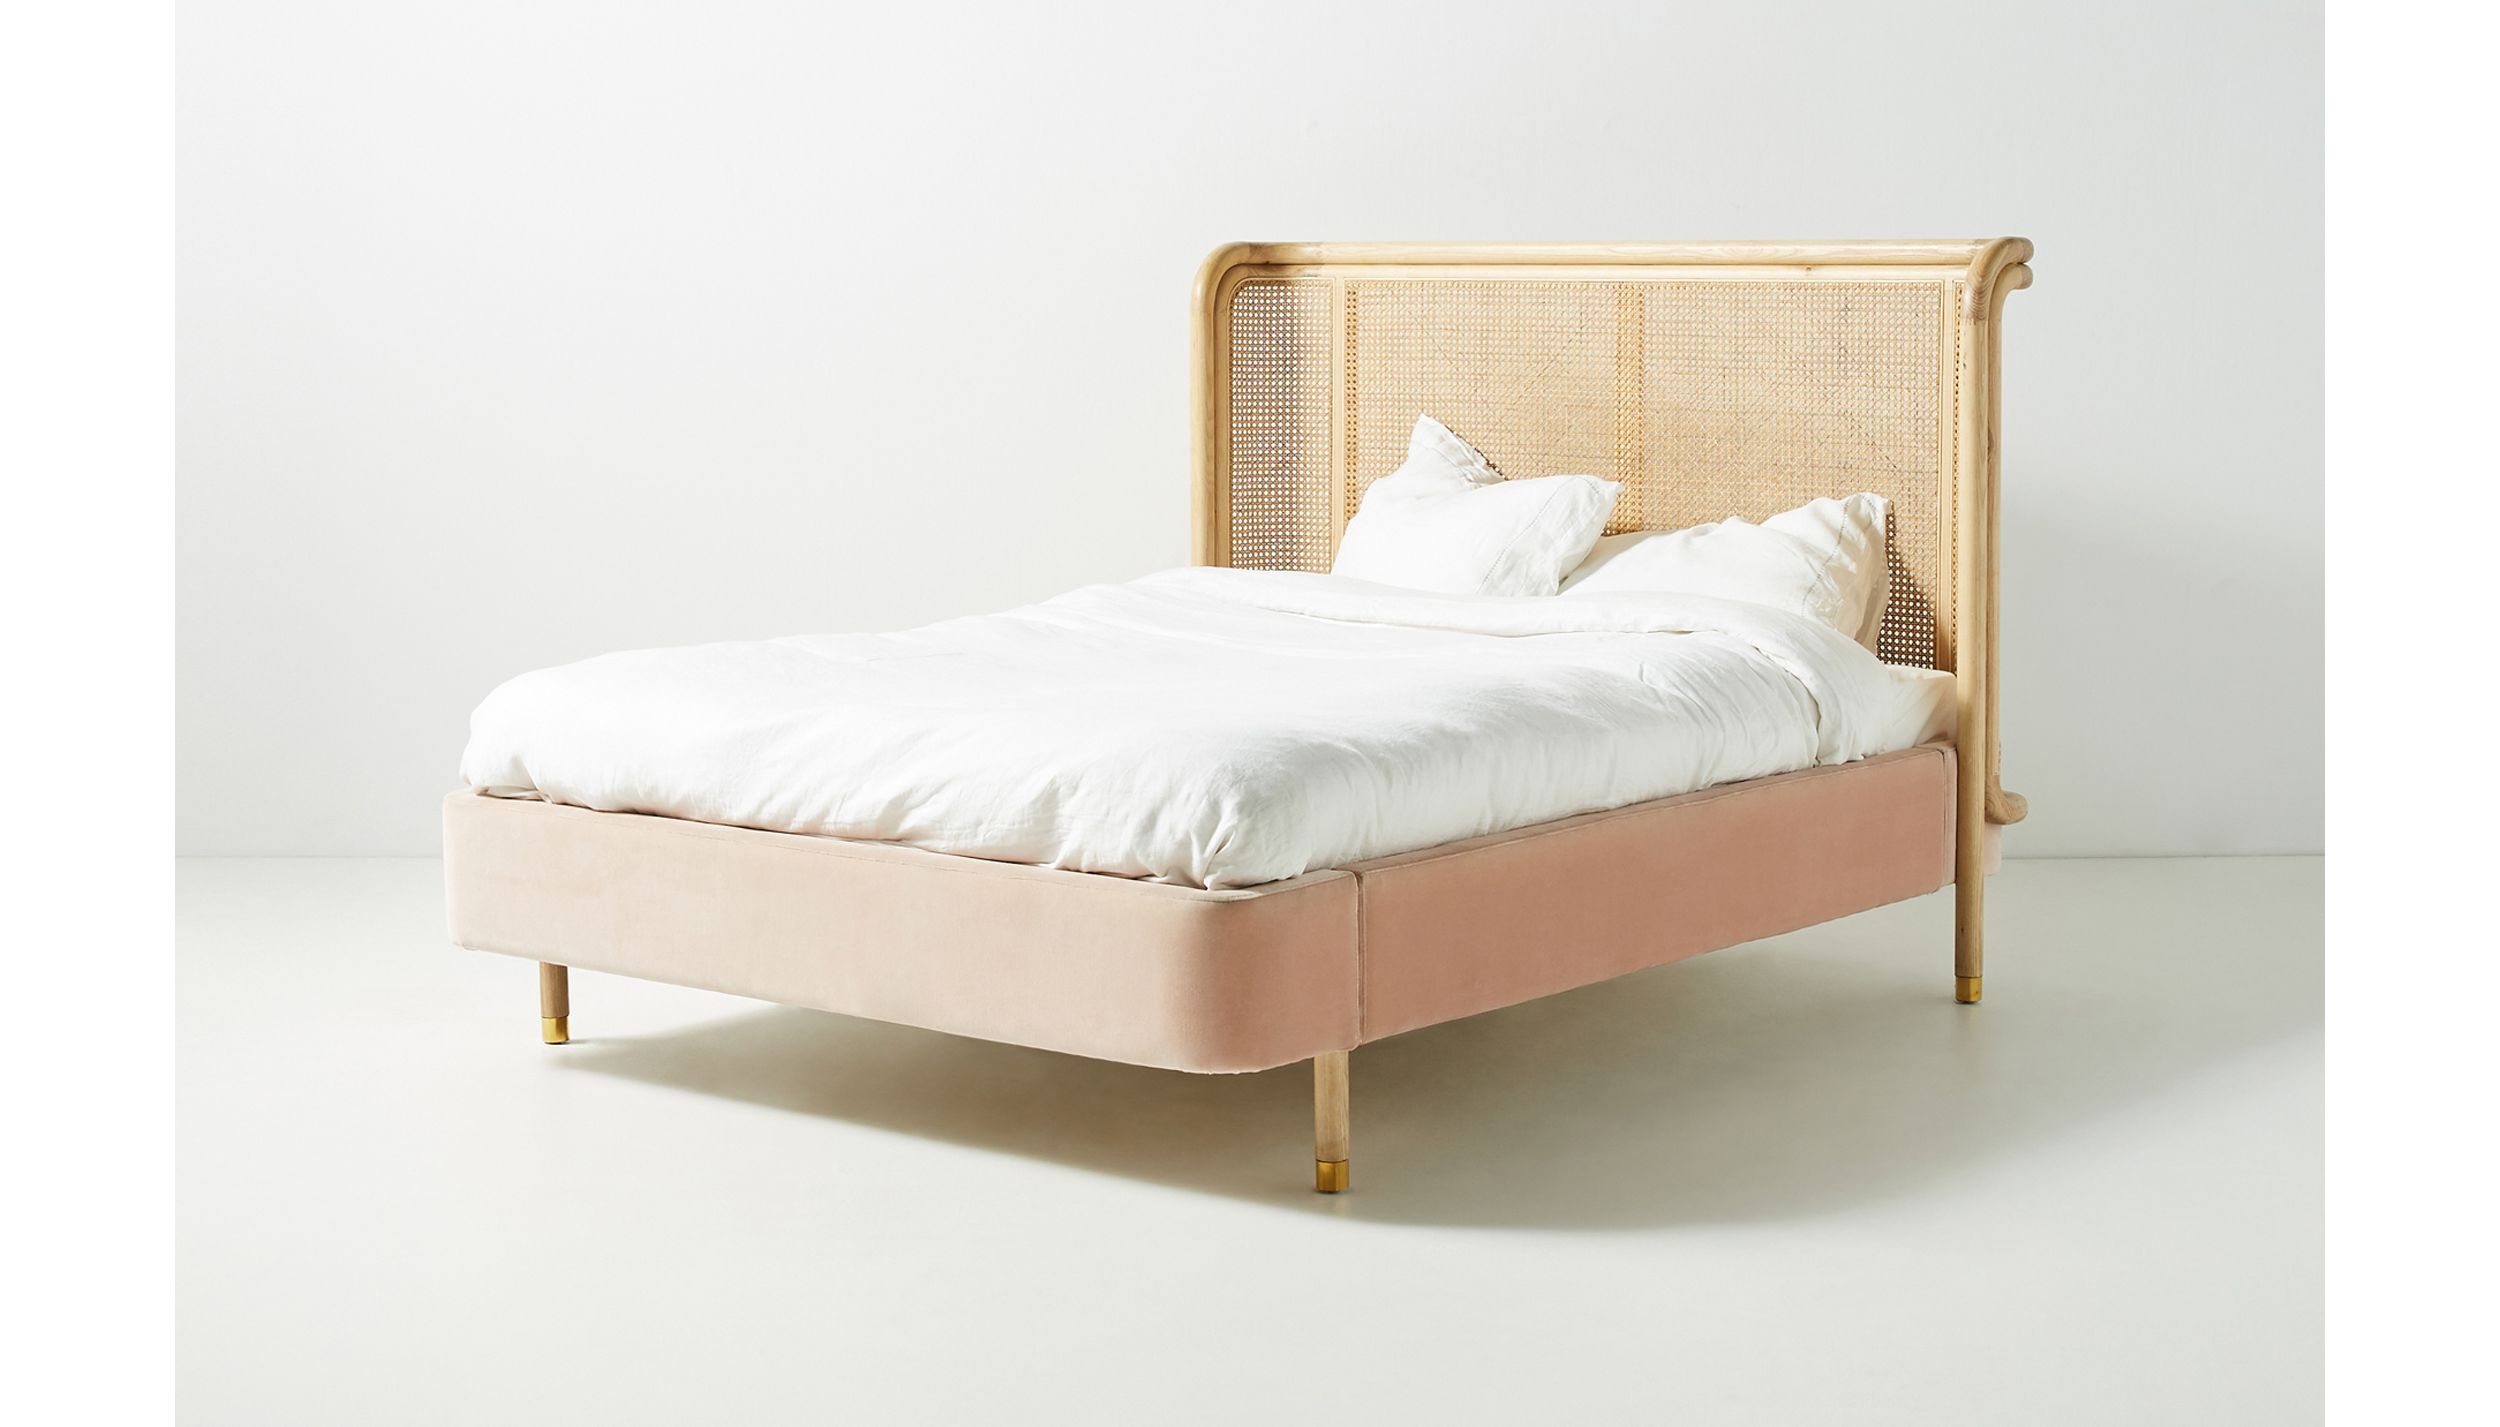 Heatherfield Bed By Anthropologie in Assorted Size Q top/bed - Image 1